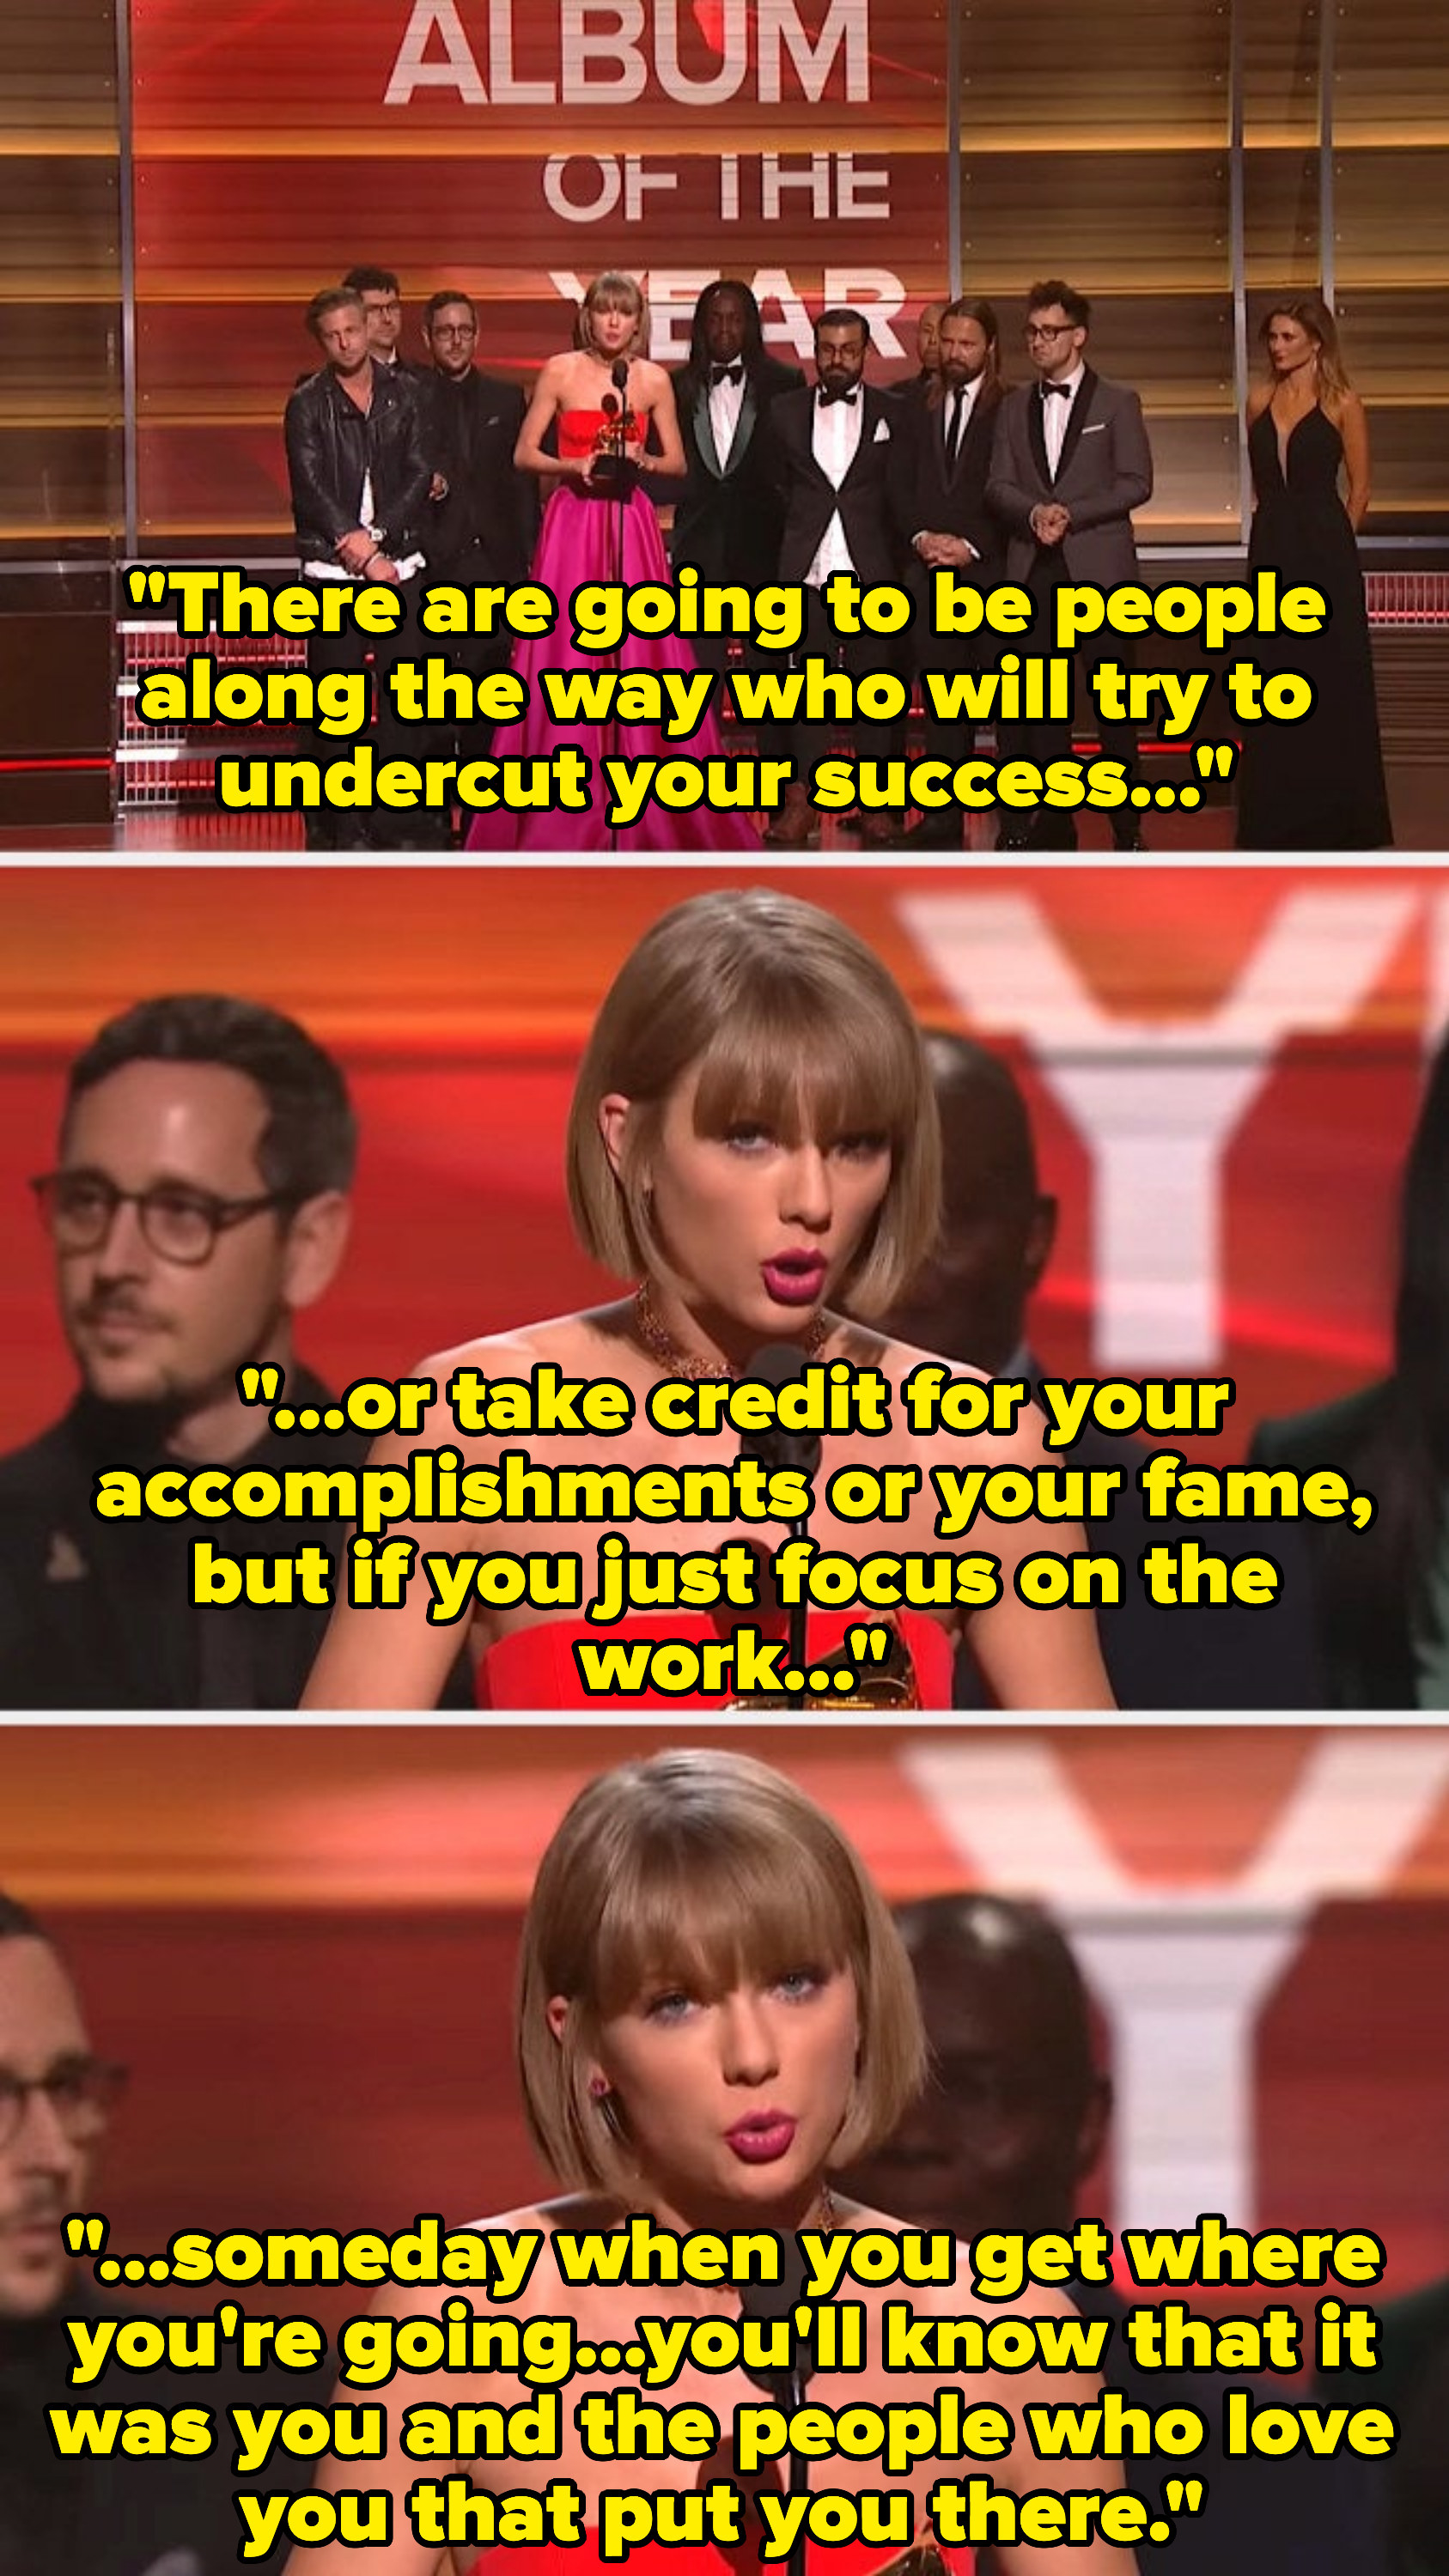 Taylor says there will be people who try to take credit for your accomplishments, but if you keep working hard, you&#x27;ll get where you want to go and you&#x27;ll know it was you who put yourself there